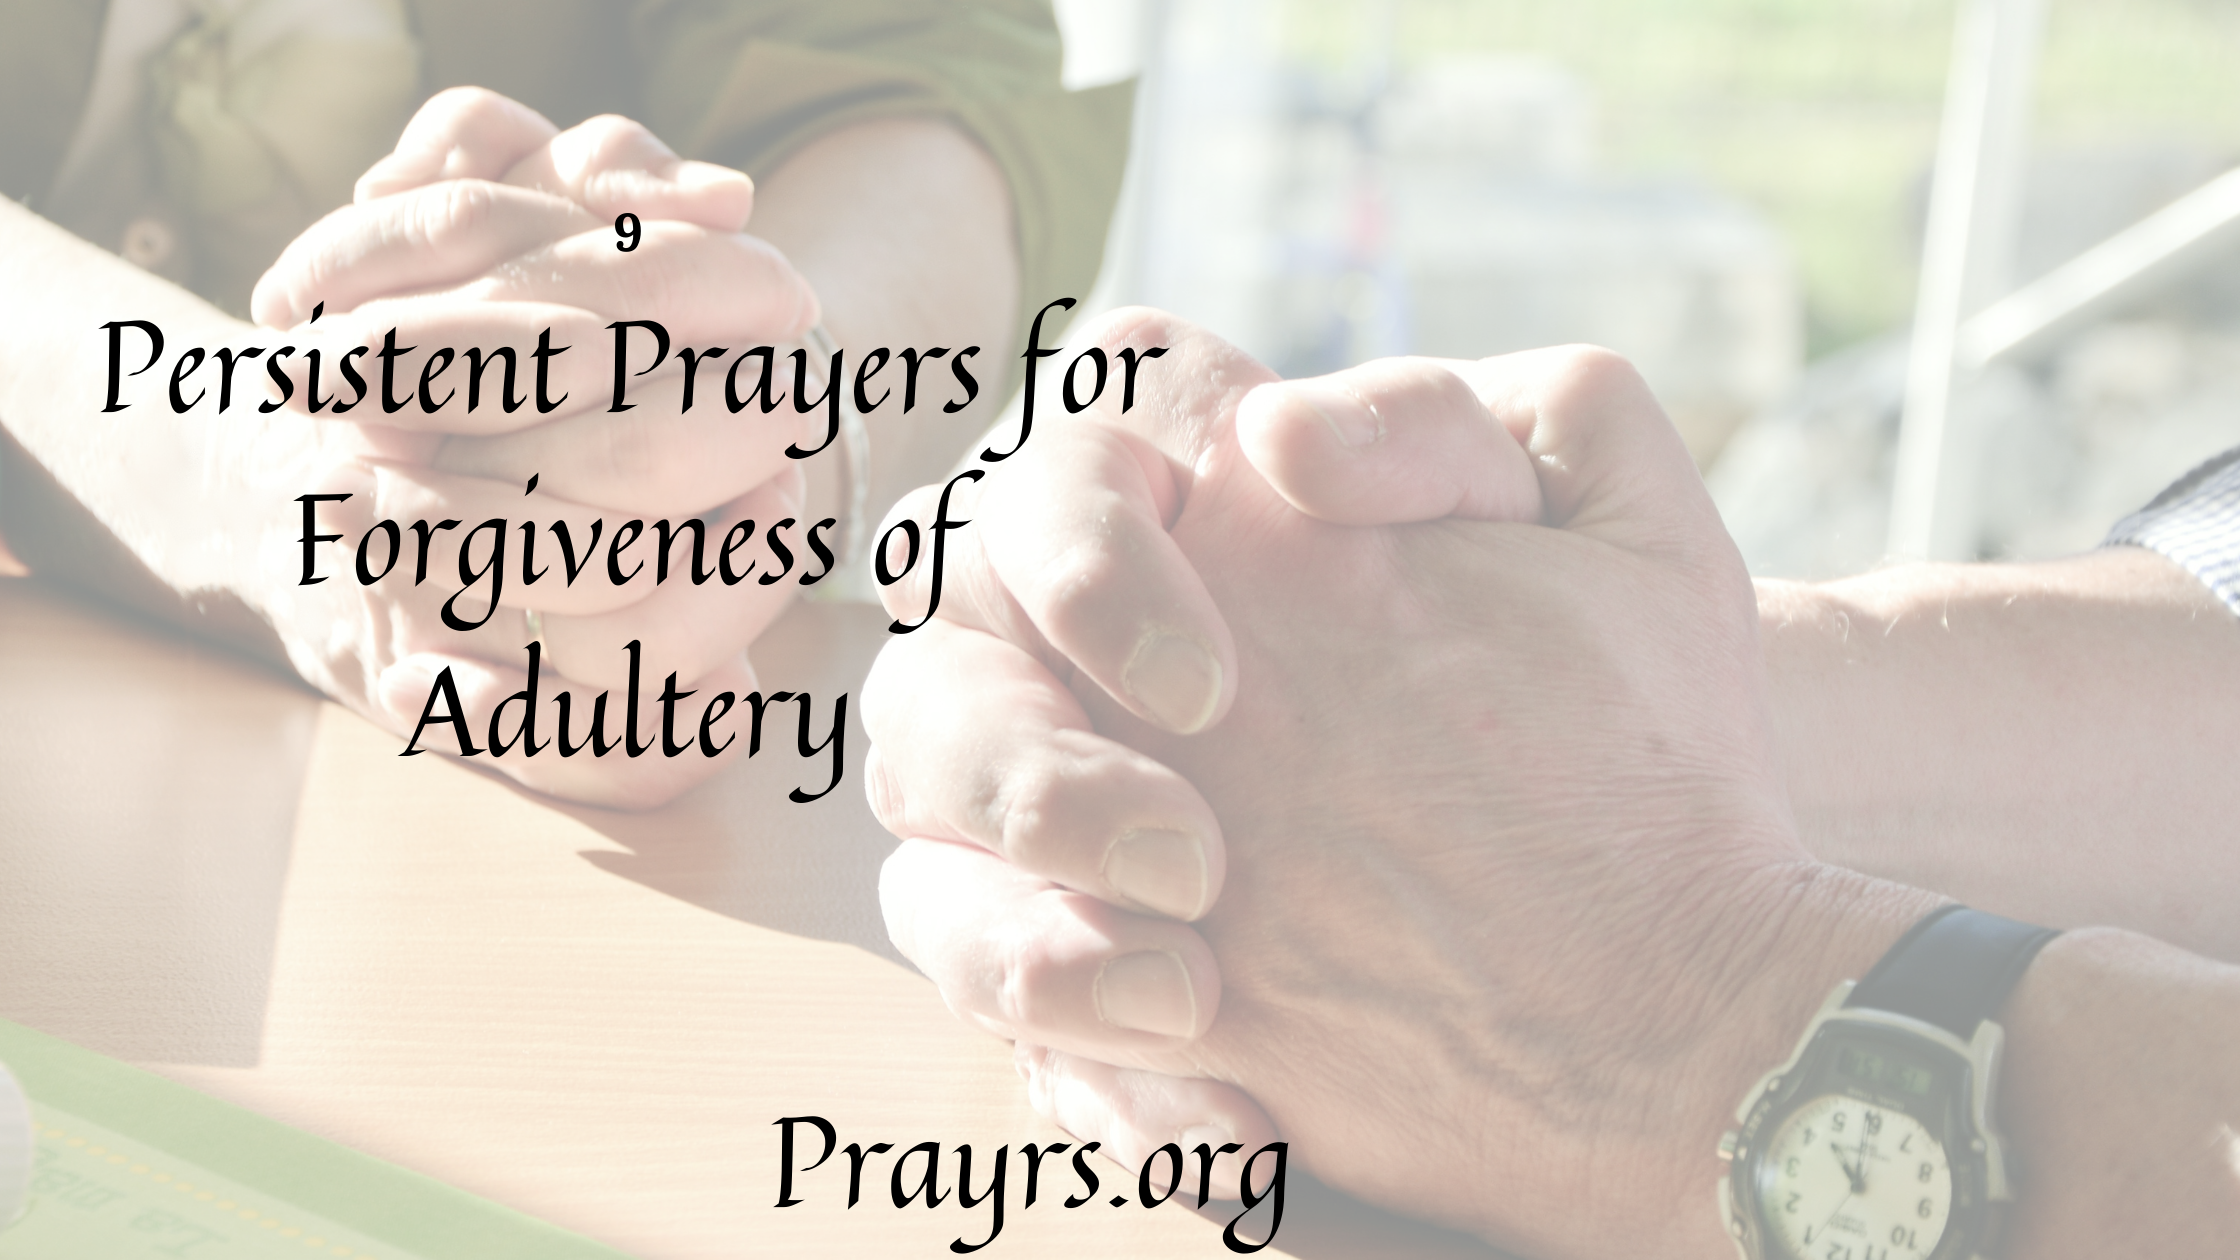 9 Persistent Prayers for Forgiveness of Adultery